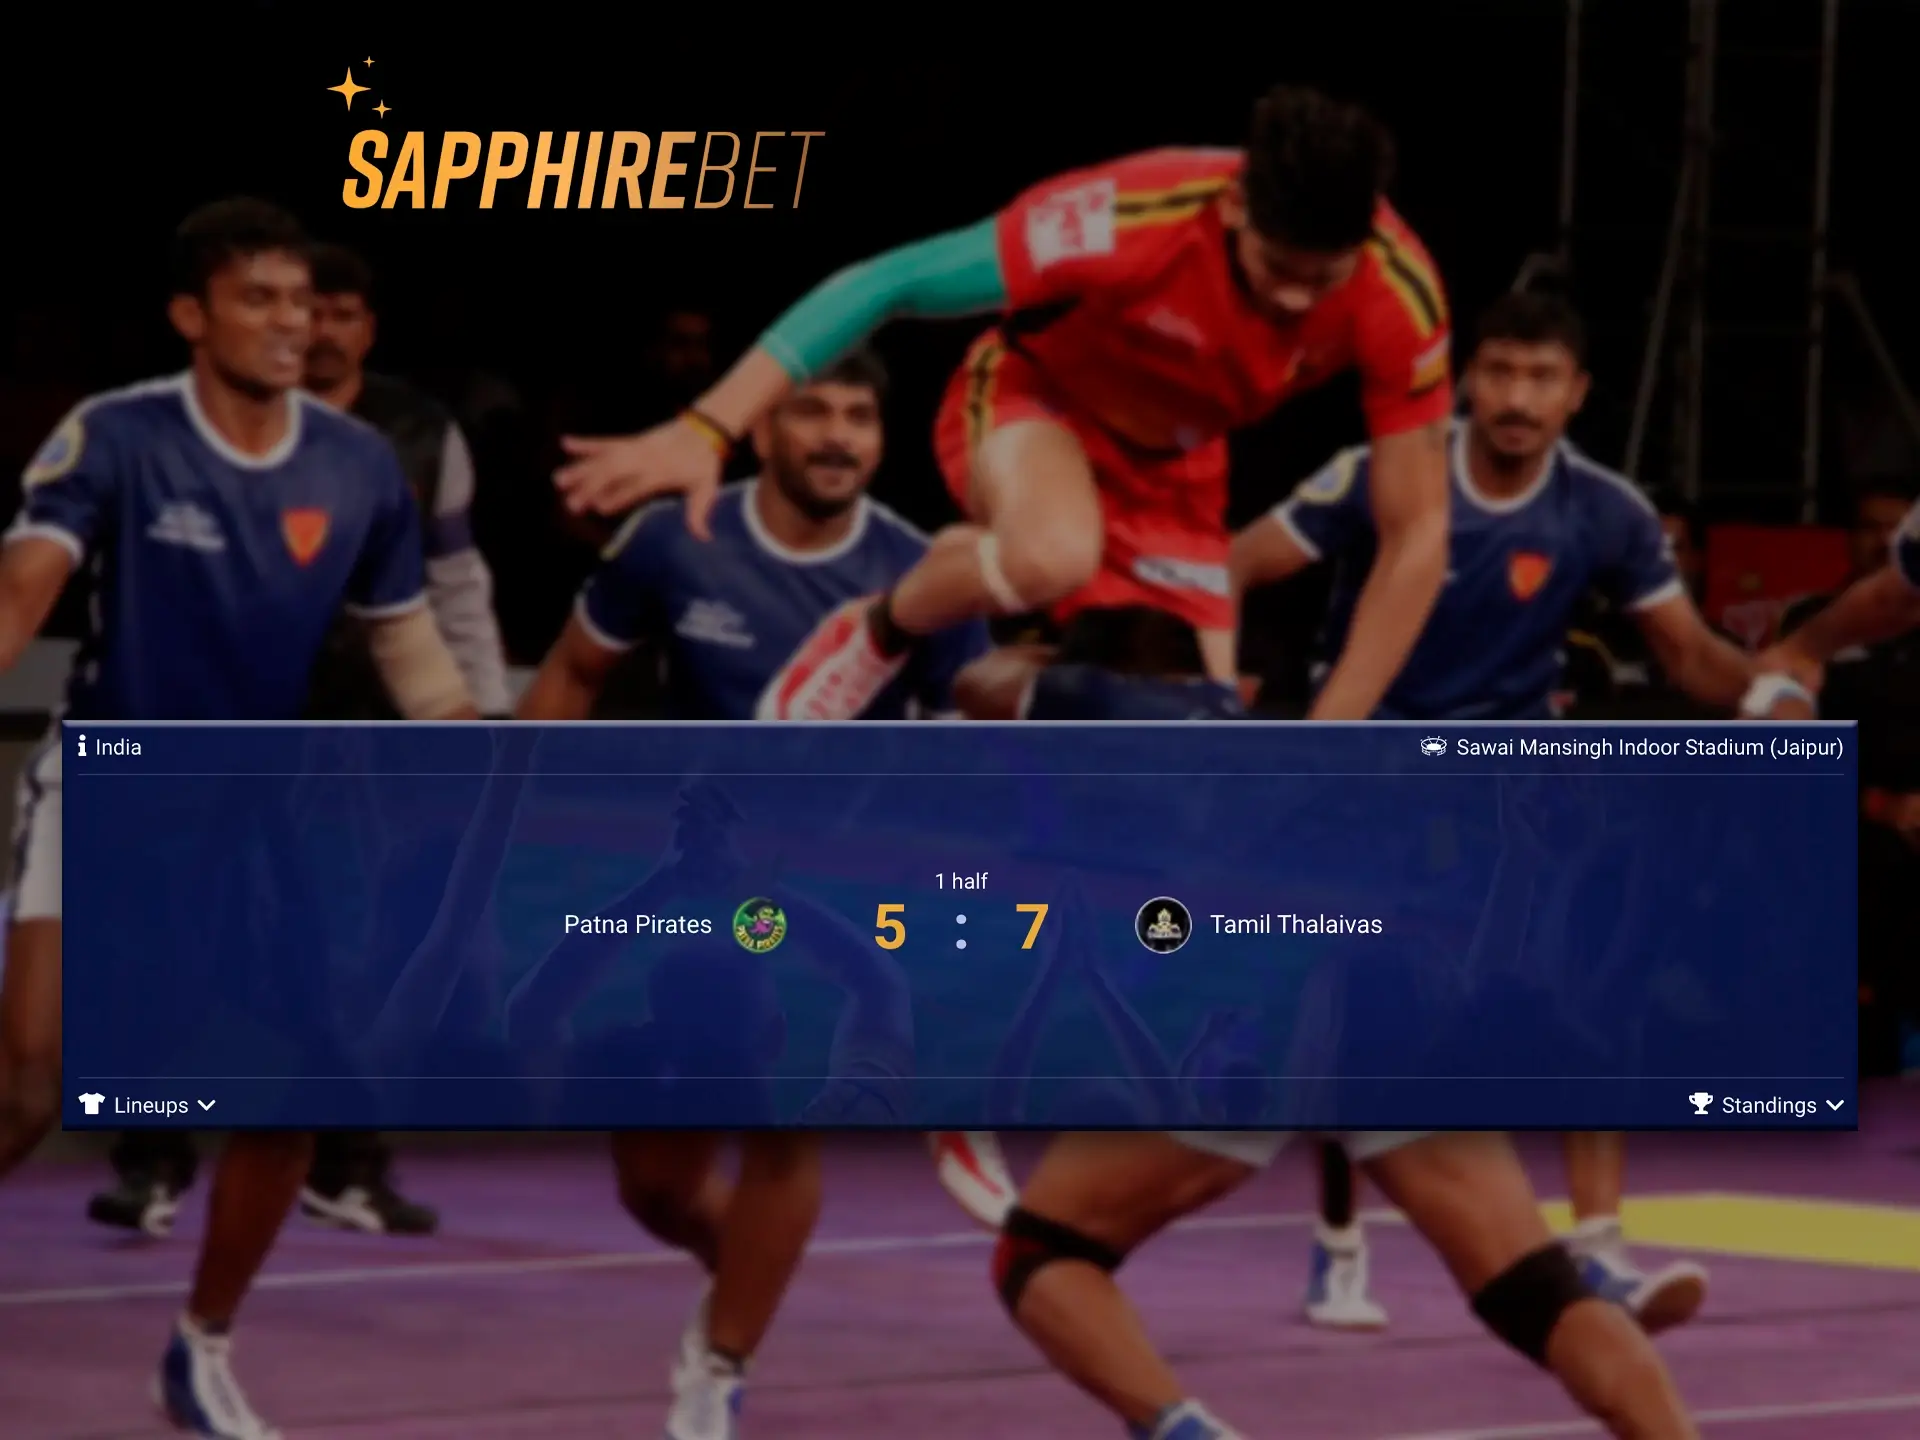 Pay attention to the online statistics of the Kabaddi match when watching at Sapphirebet.